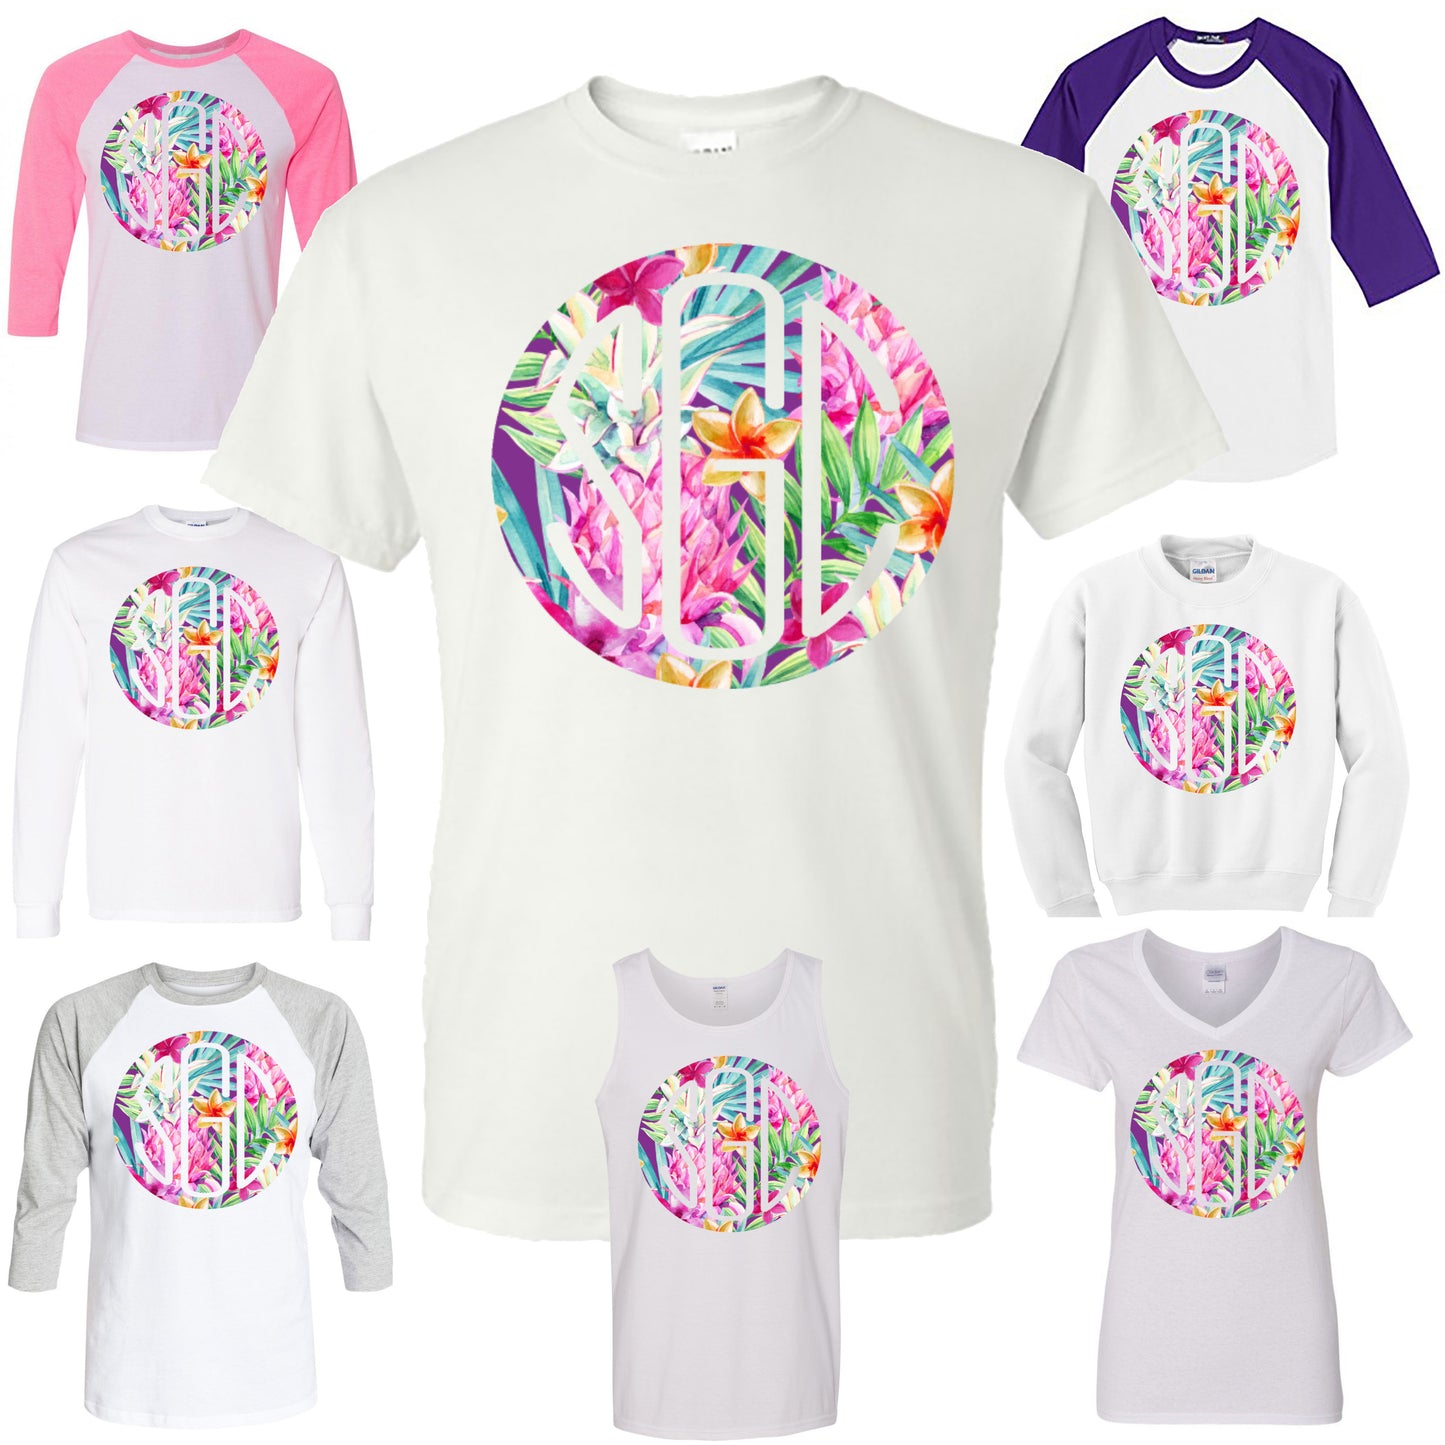 PINEAPPLE FLORAL ROUND MONOGRAM PRINTED SHIRT - Southern Grace Creations